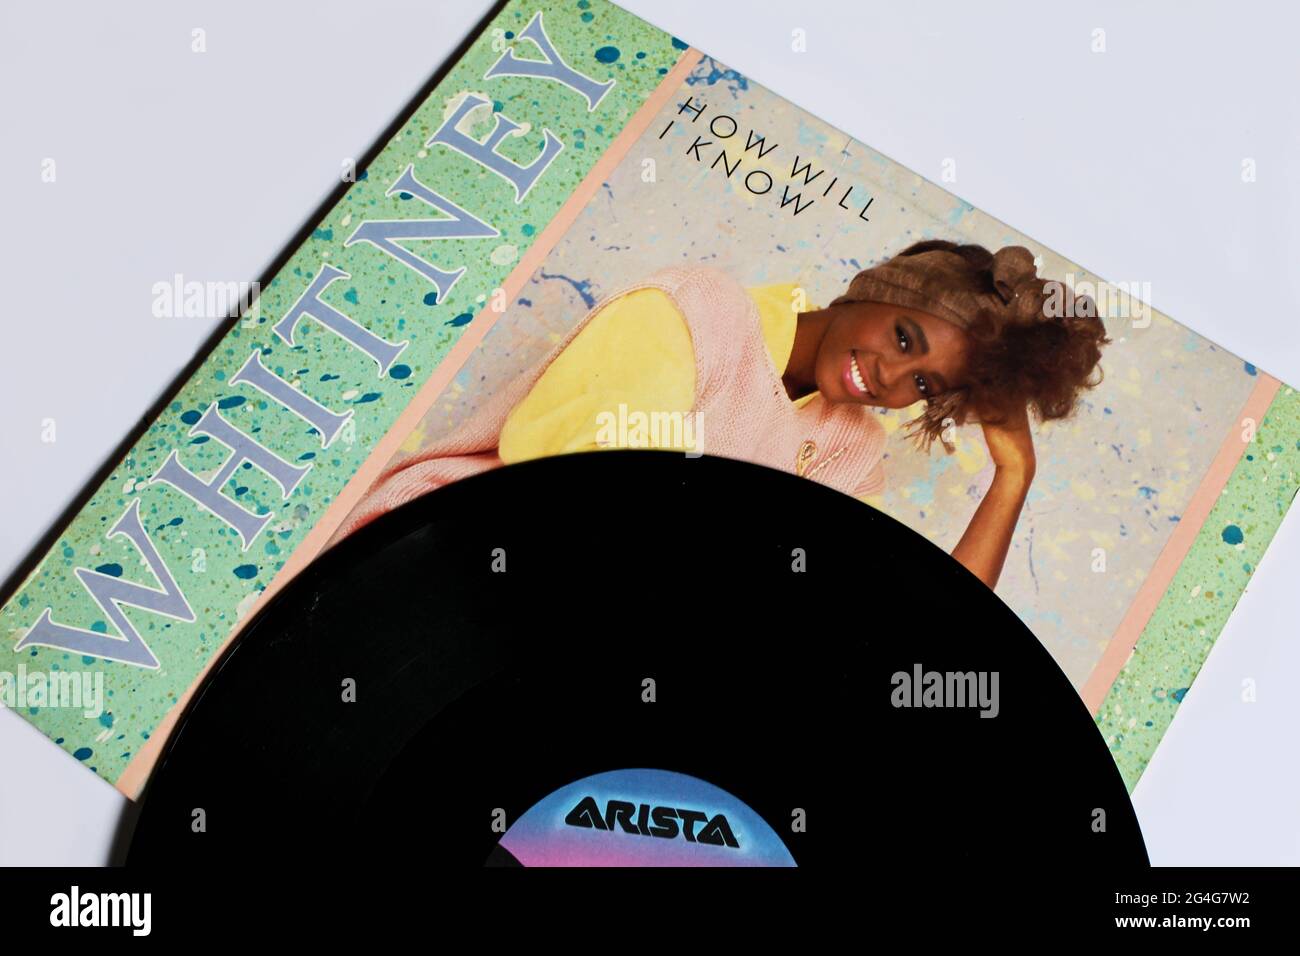 Miami, FL, USA: June 2021: Dance-rock, R&B and pop artist, Whitney Houston music album on vinyl record LP disc. Titled: Whitney single How Will I know Stock Photo